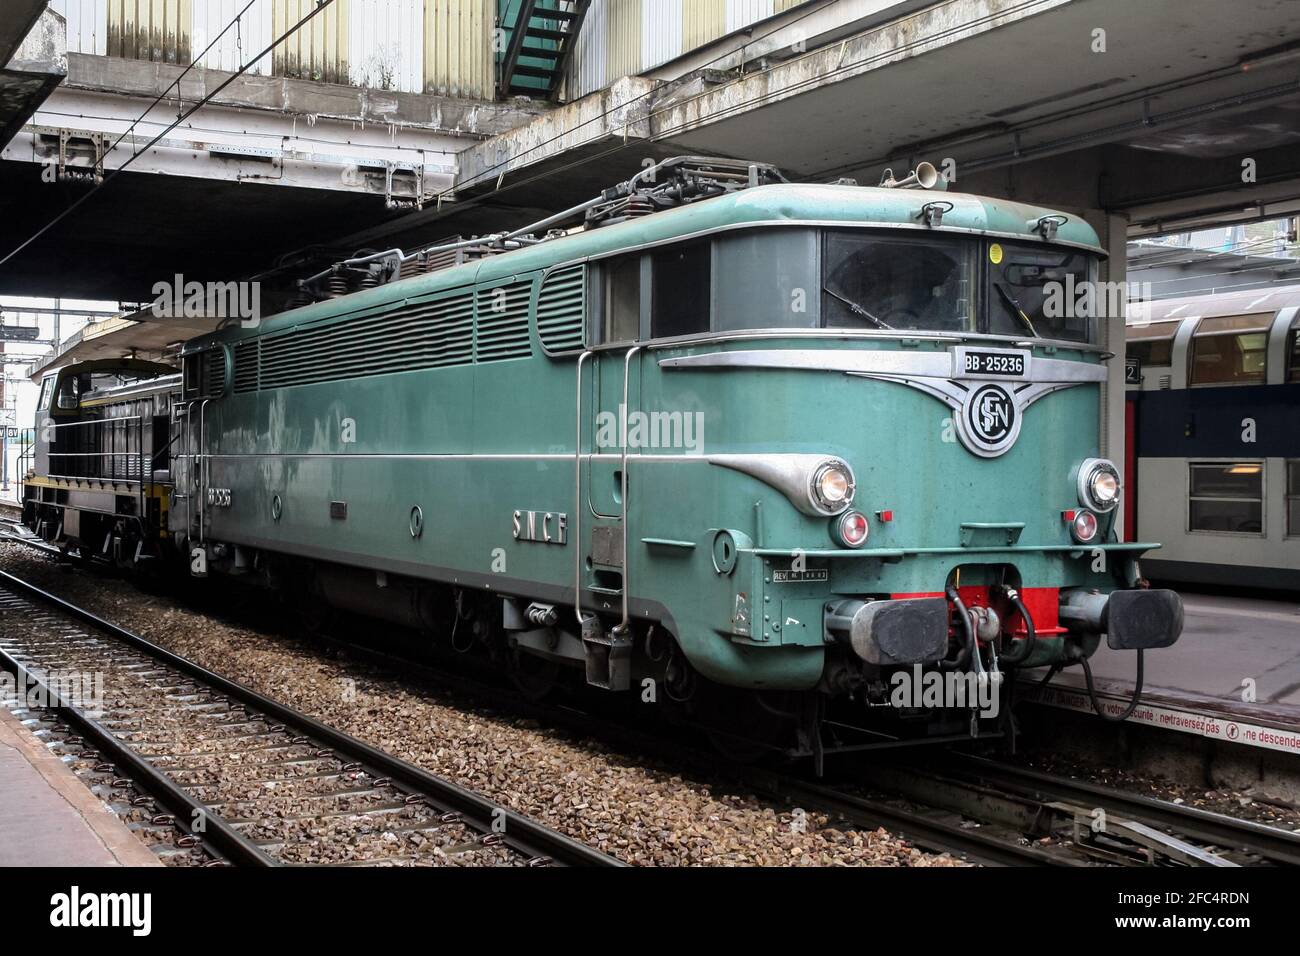 VERSAILLES, FRANCE - JULY 22, 2011: Heritage electric locomotive BB 25200 series standing on a platform of Versailles Chantier train station. It's a p Stock Photo